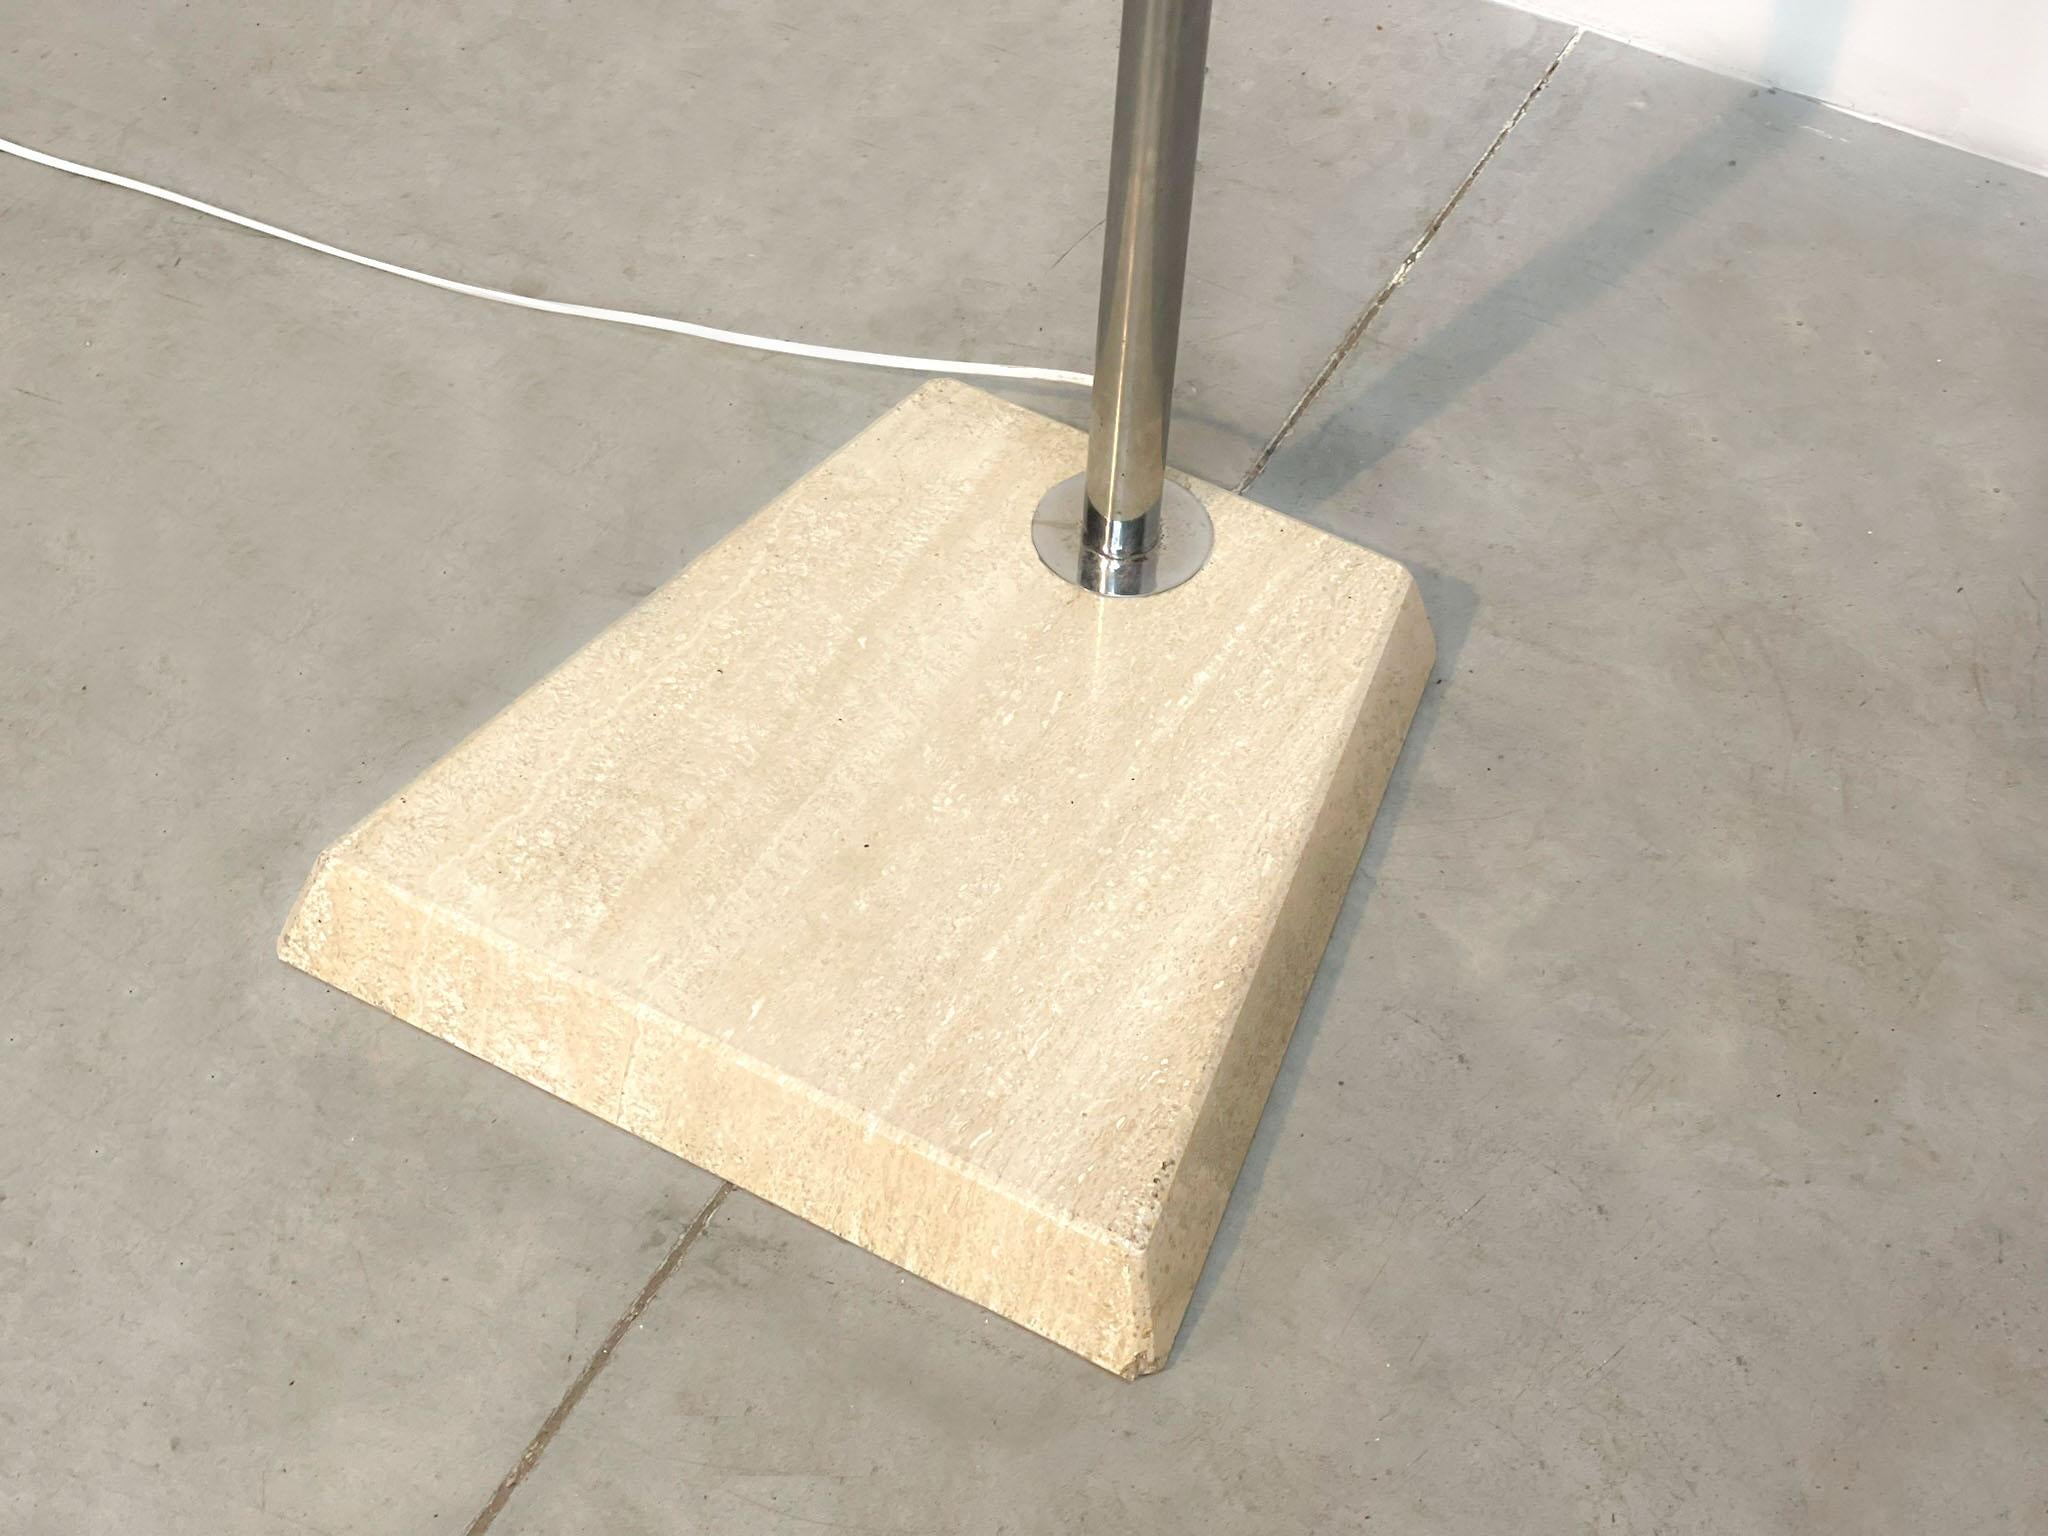 Italian floorlamp with travertine base
Very versatile and stylish Italian floor lamp, made in the 70's in Italy by an unknown manufacturer. Nevertheless it is a beautiful quality floor lamp! You can put the lamps as you wish.

 

The stylish